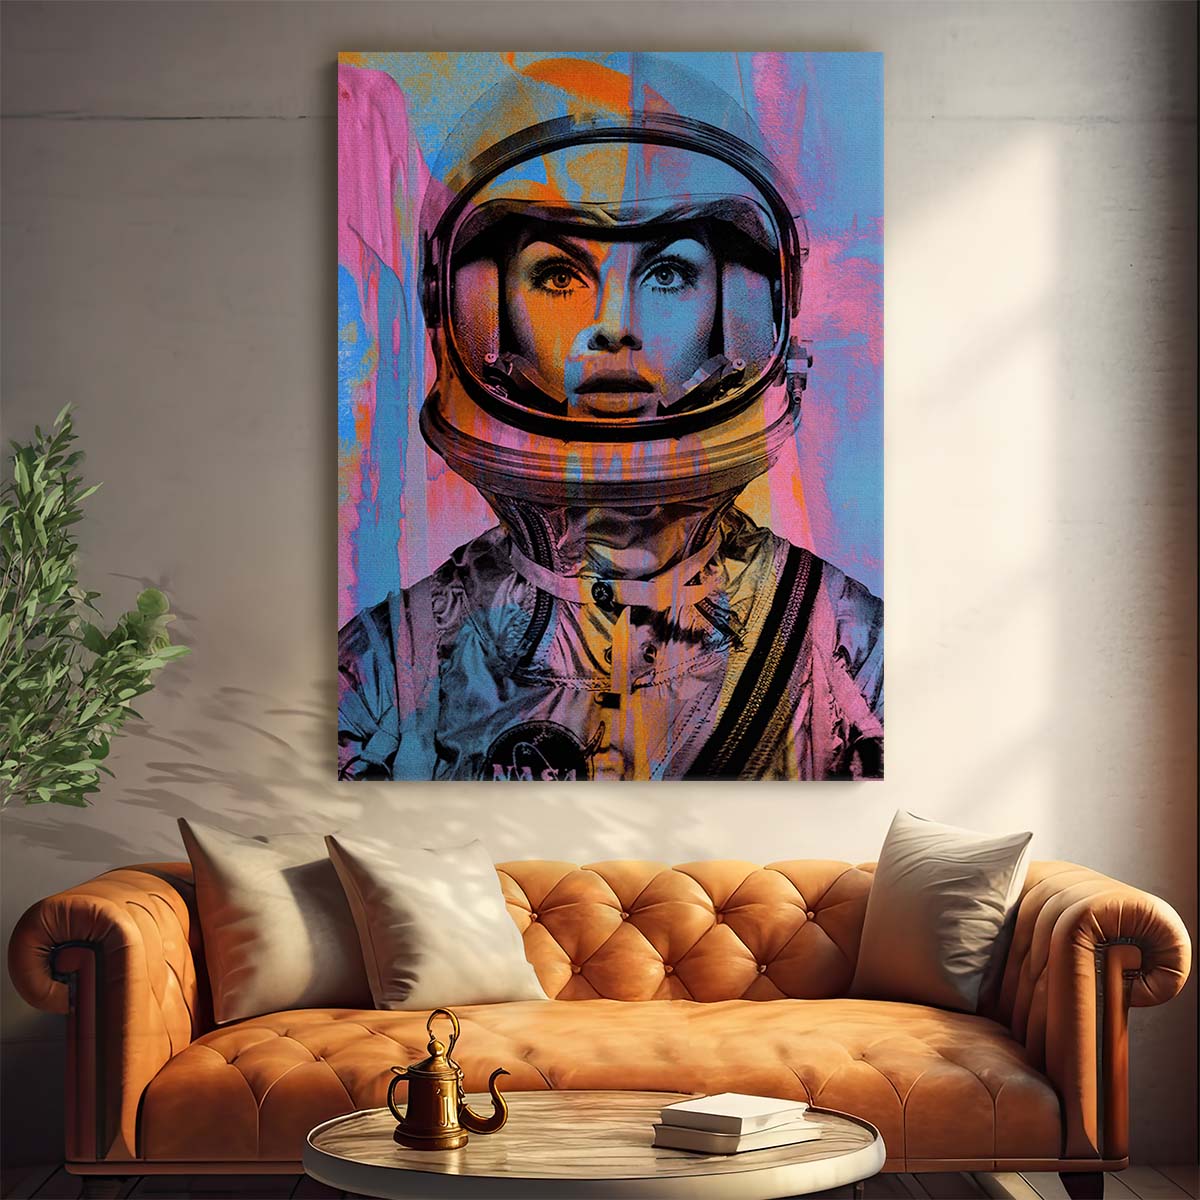 Jeannie Shrimpton Girl Astronaut 60s Space Age Wall Art by Luxuriance Designs. Made in USA.